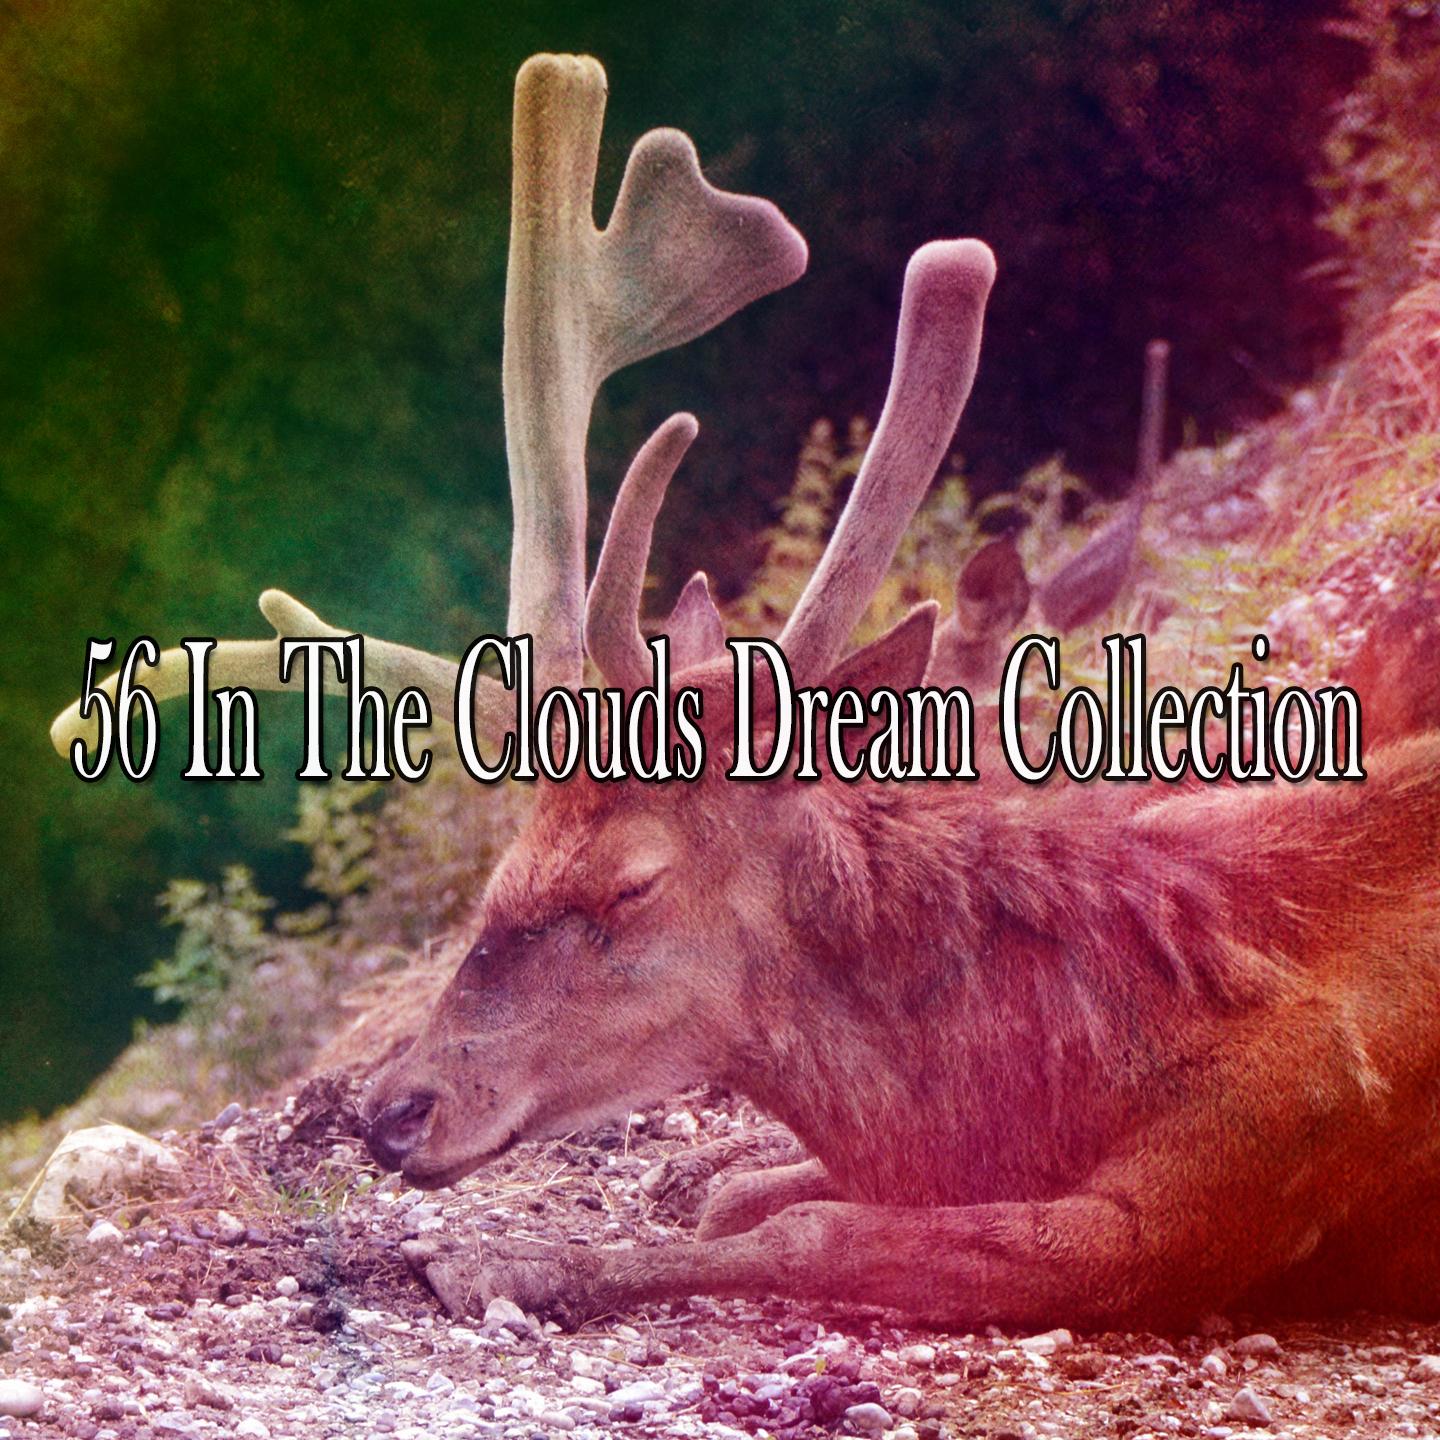 56 In the Clouds Dream Collection